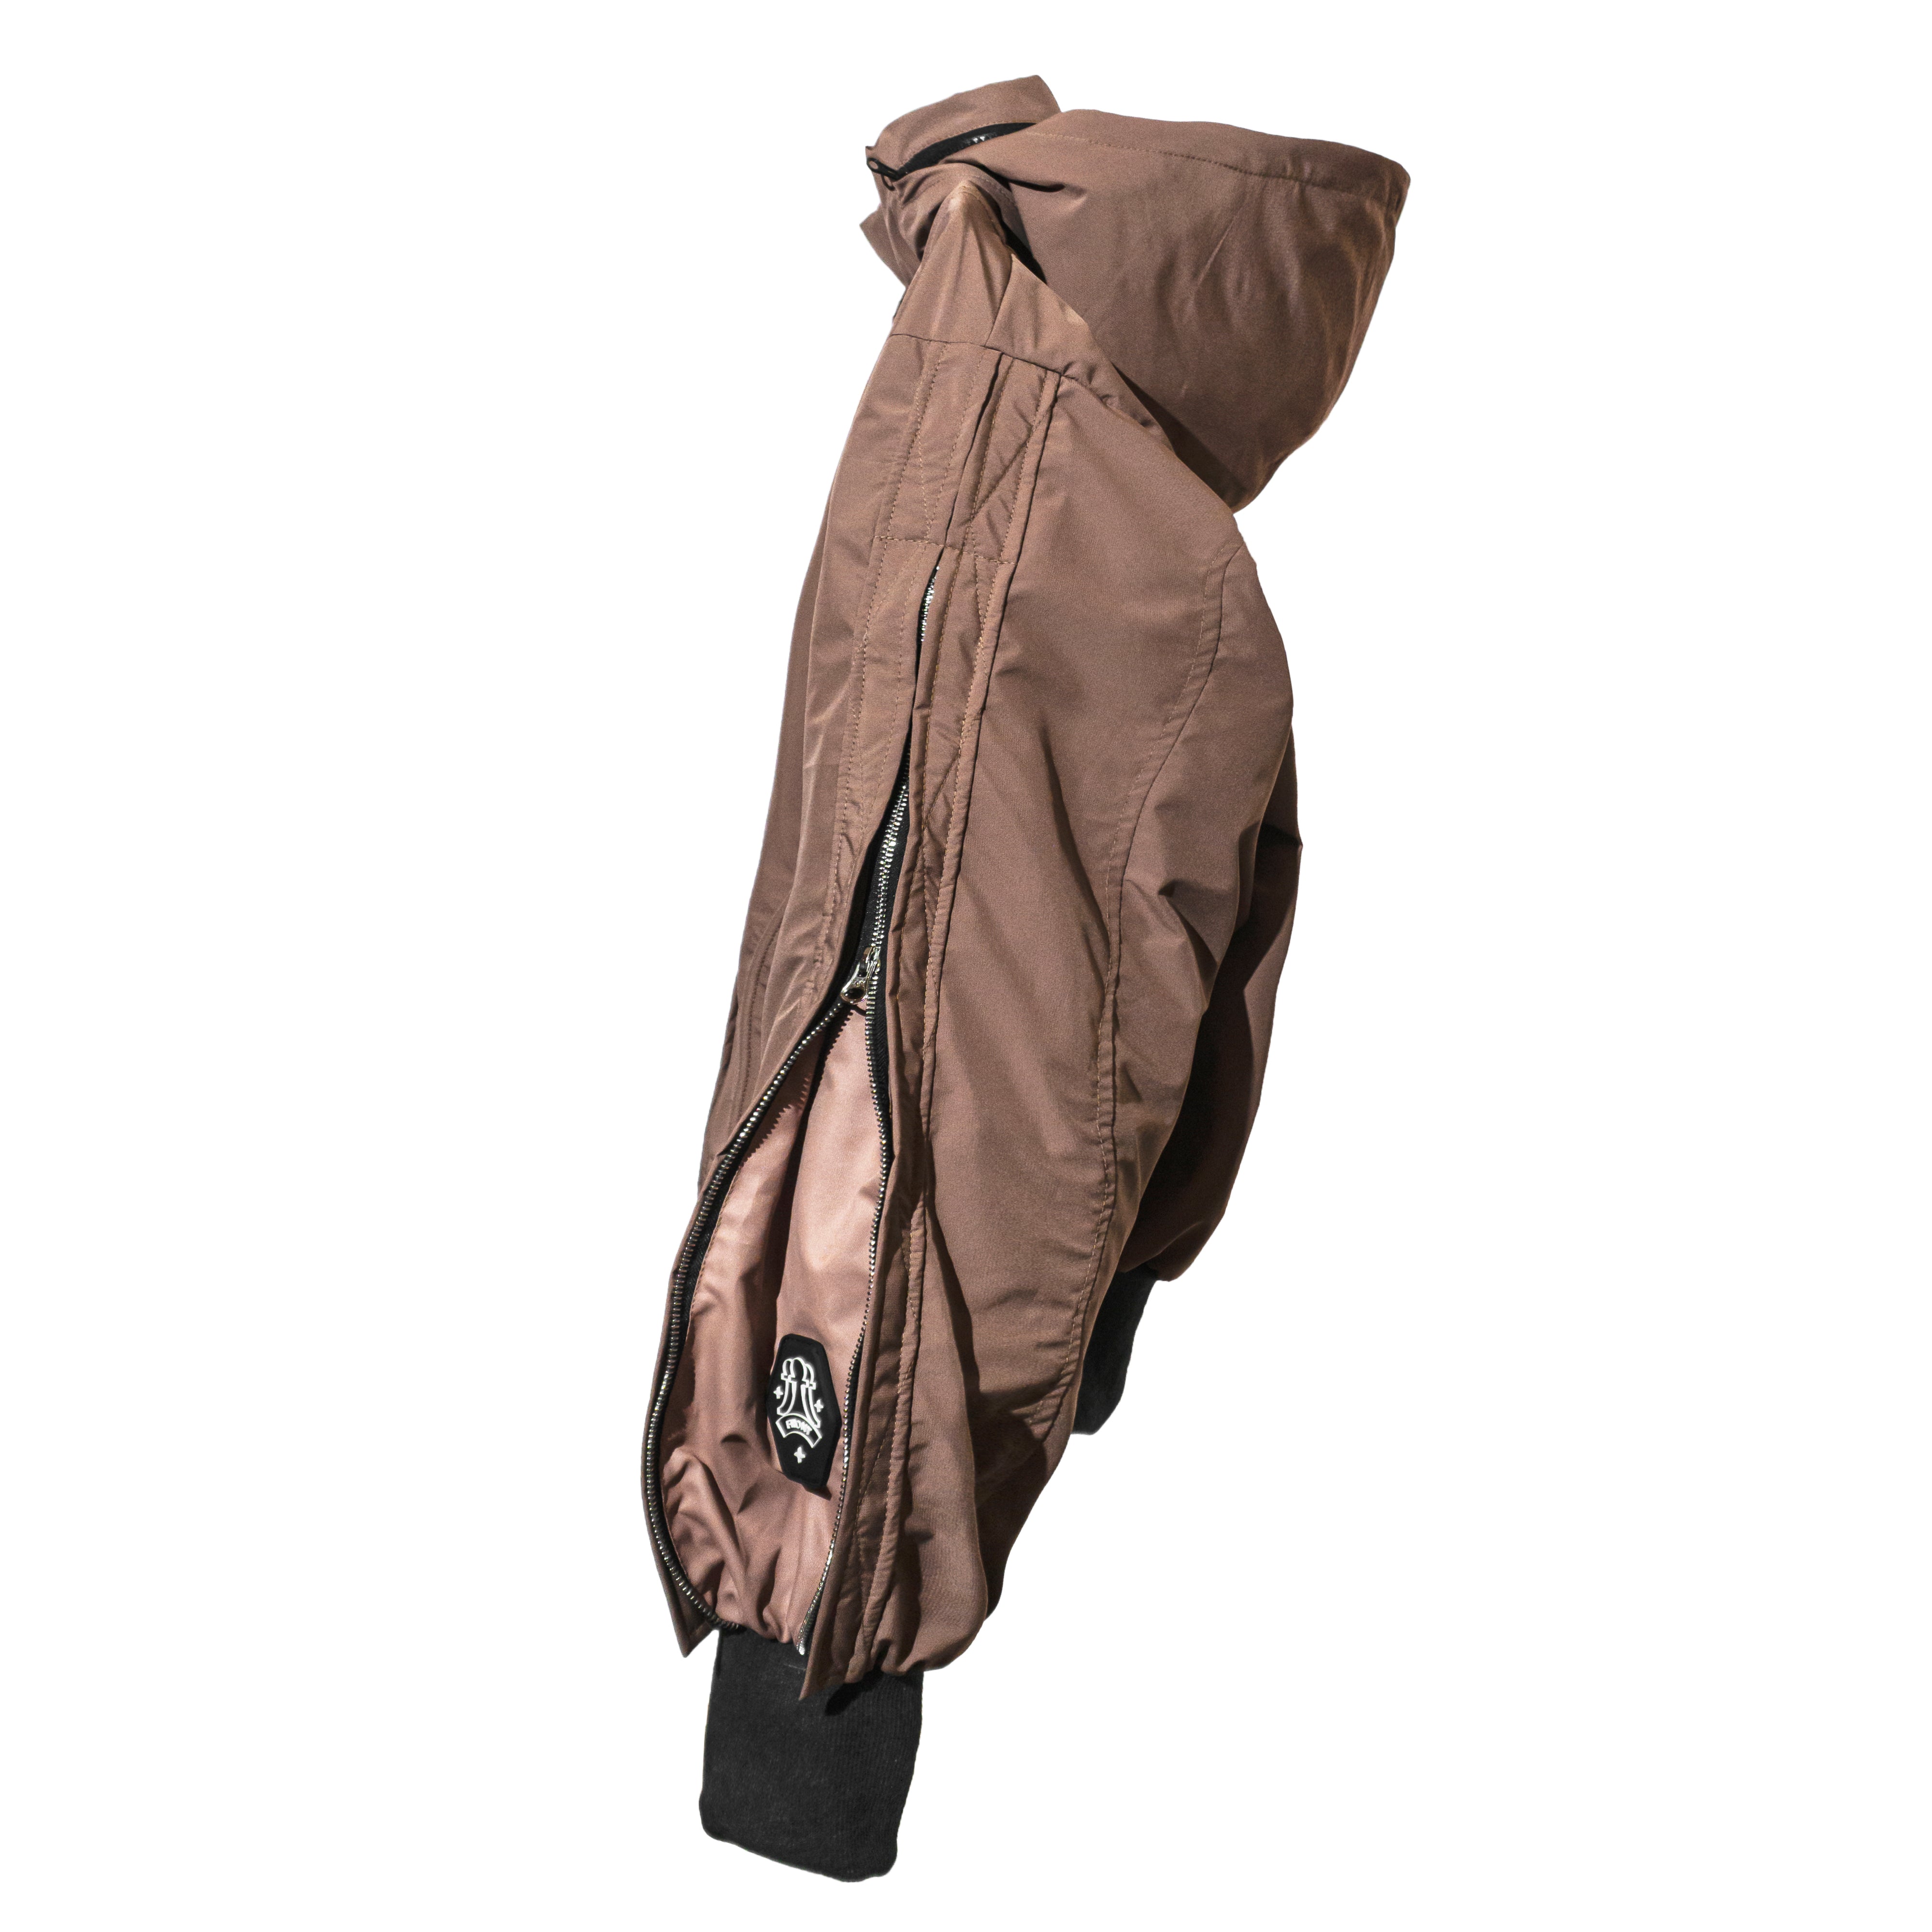 FRONT The Rook Fork Hooded Bomber Jacket YE21 - BROWN